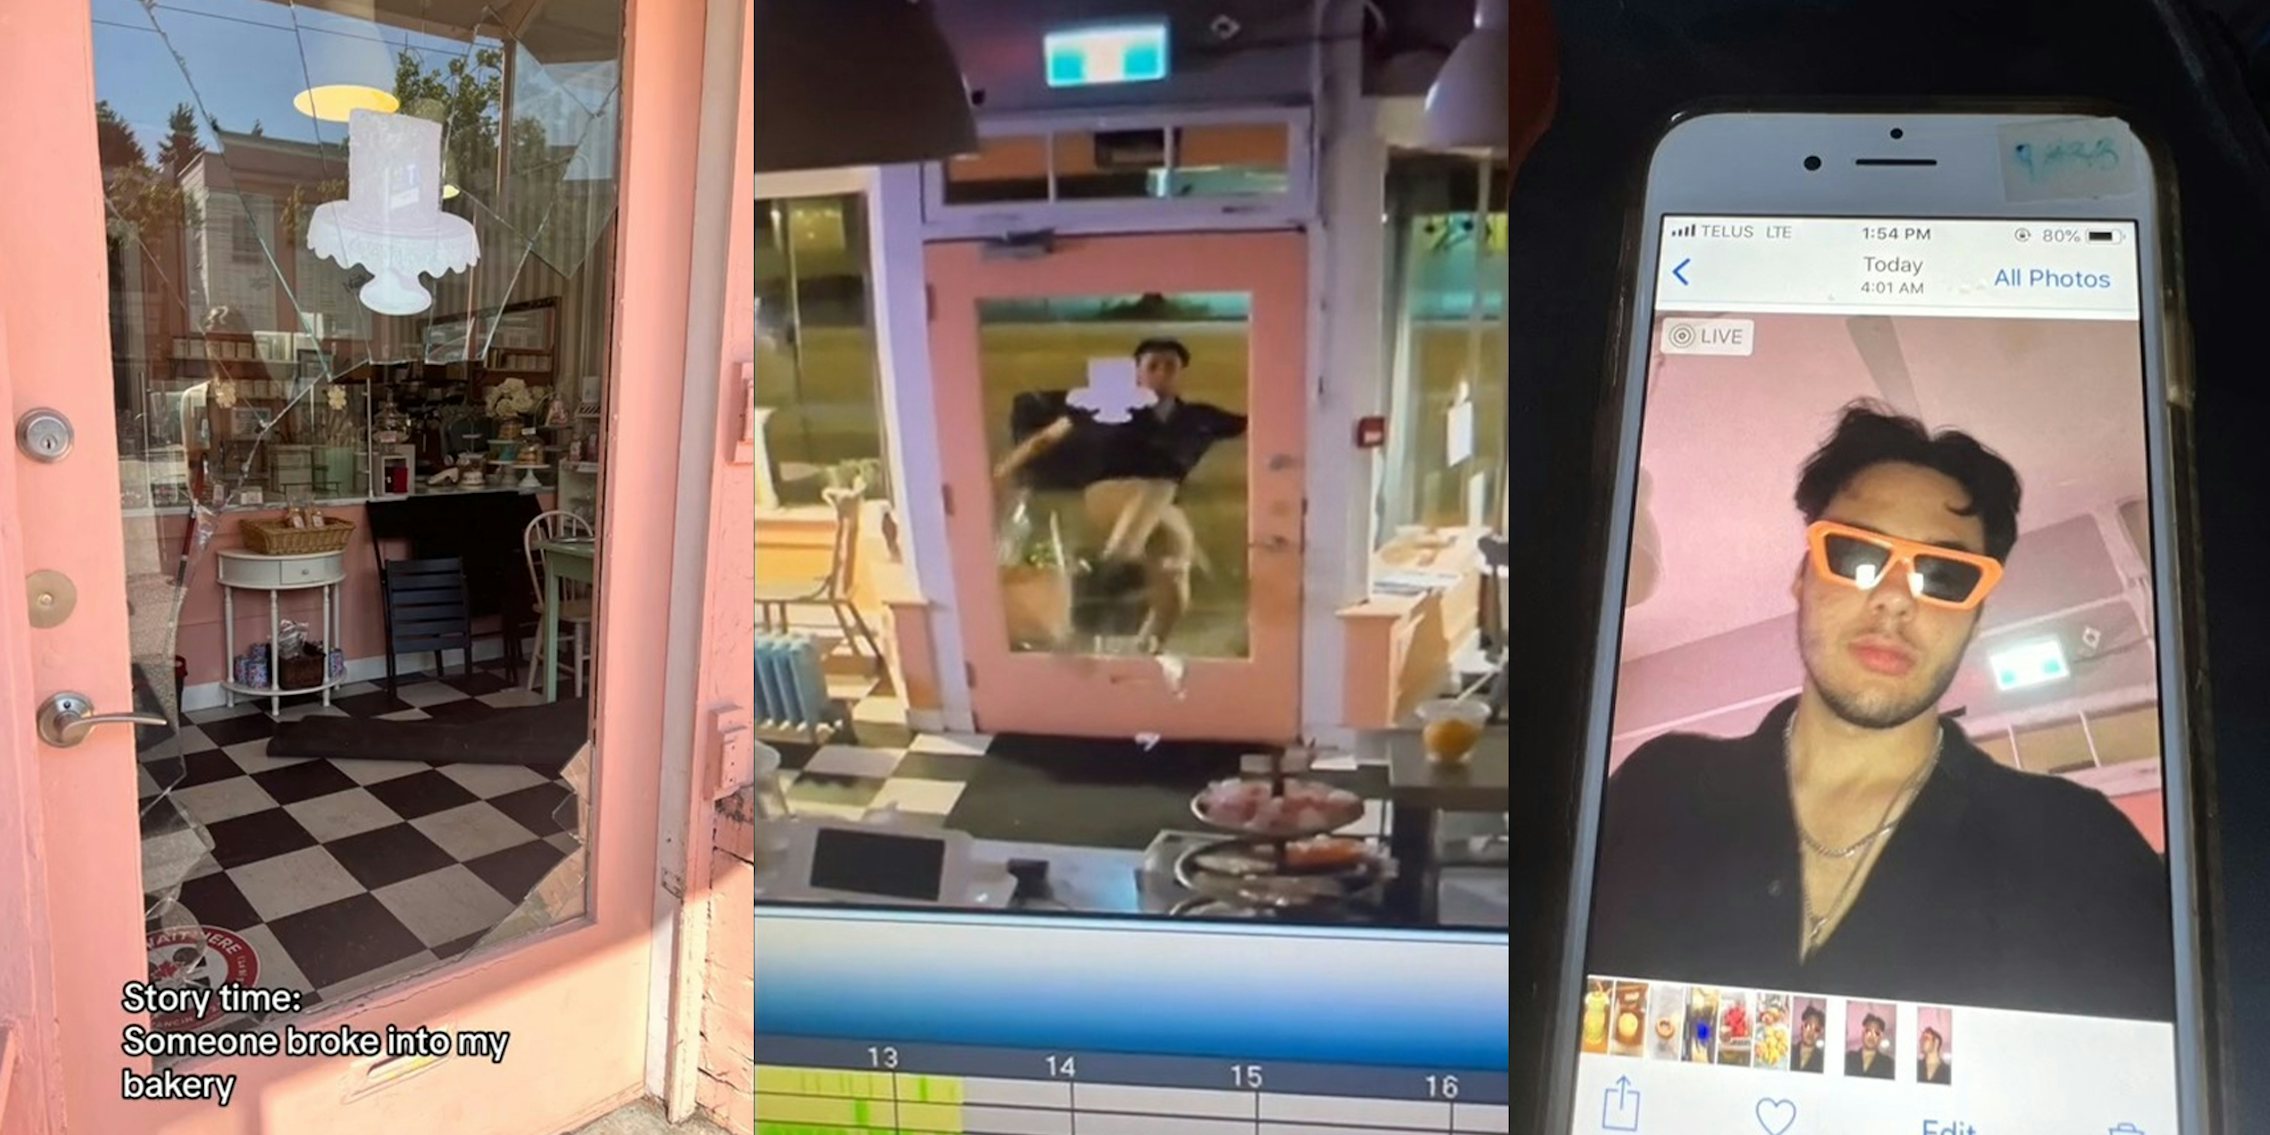 Man breaks into bakery and then tries to clean up after himself